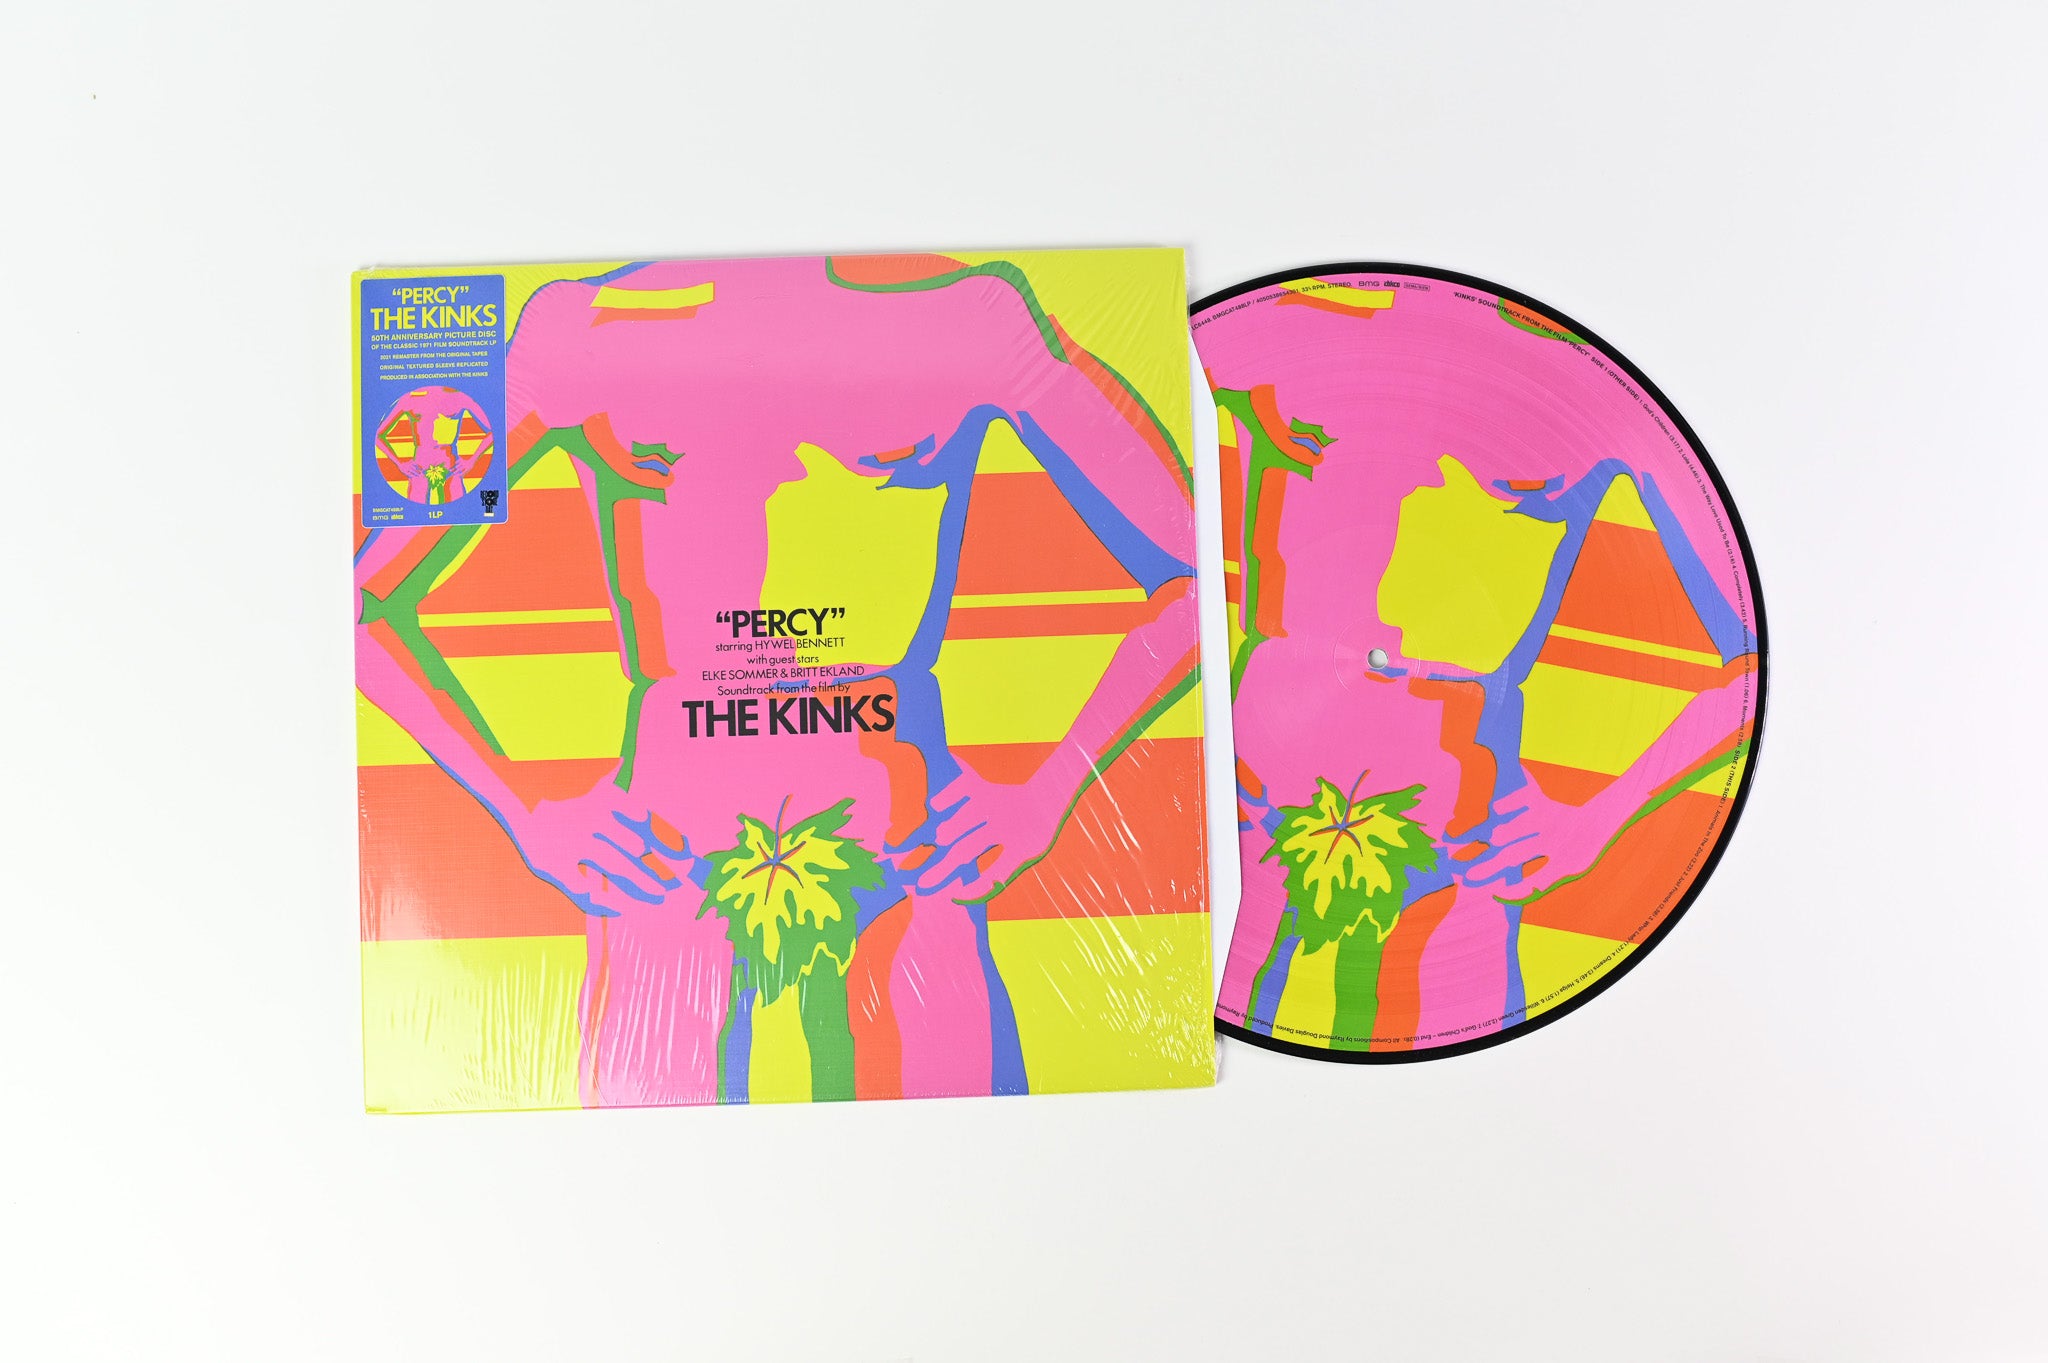 The Kinks - "Percy" on BMG Ltd RSD Picture Disc Reissue